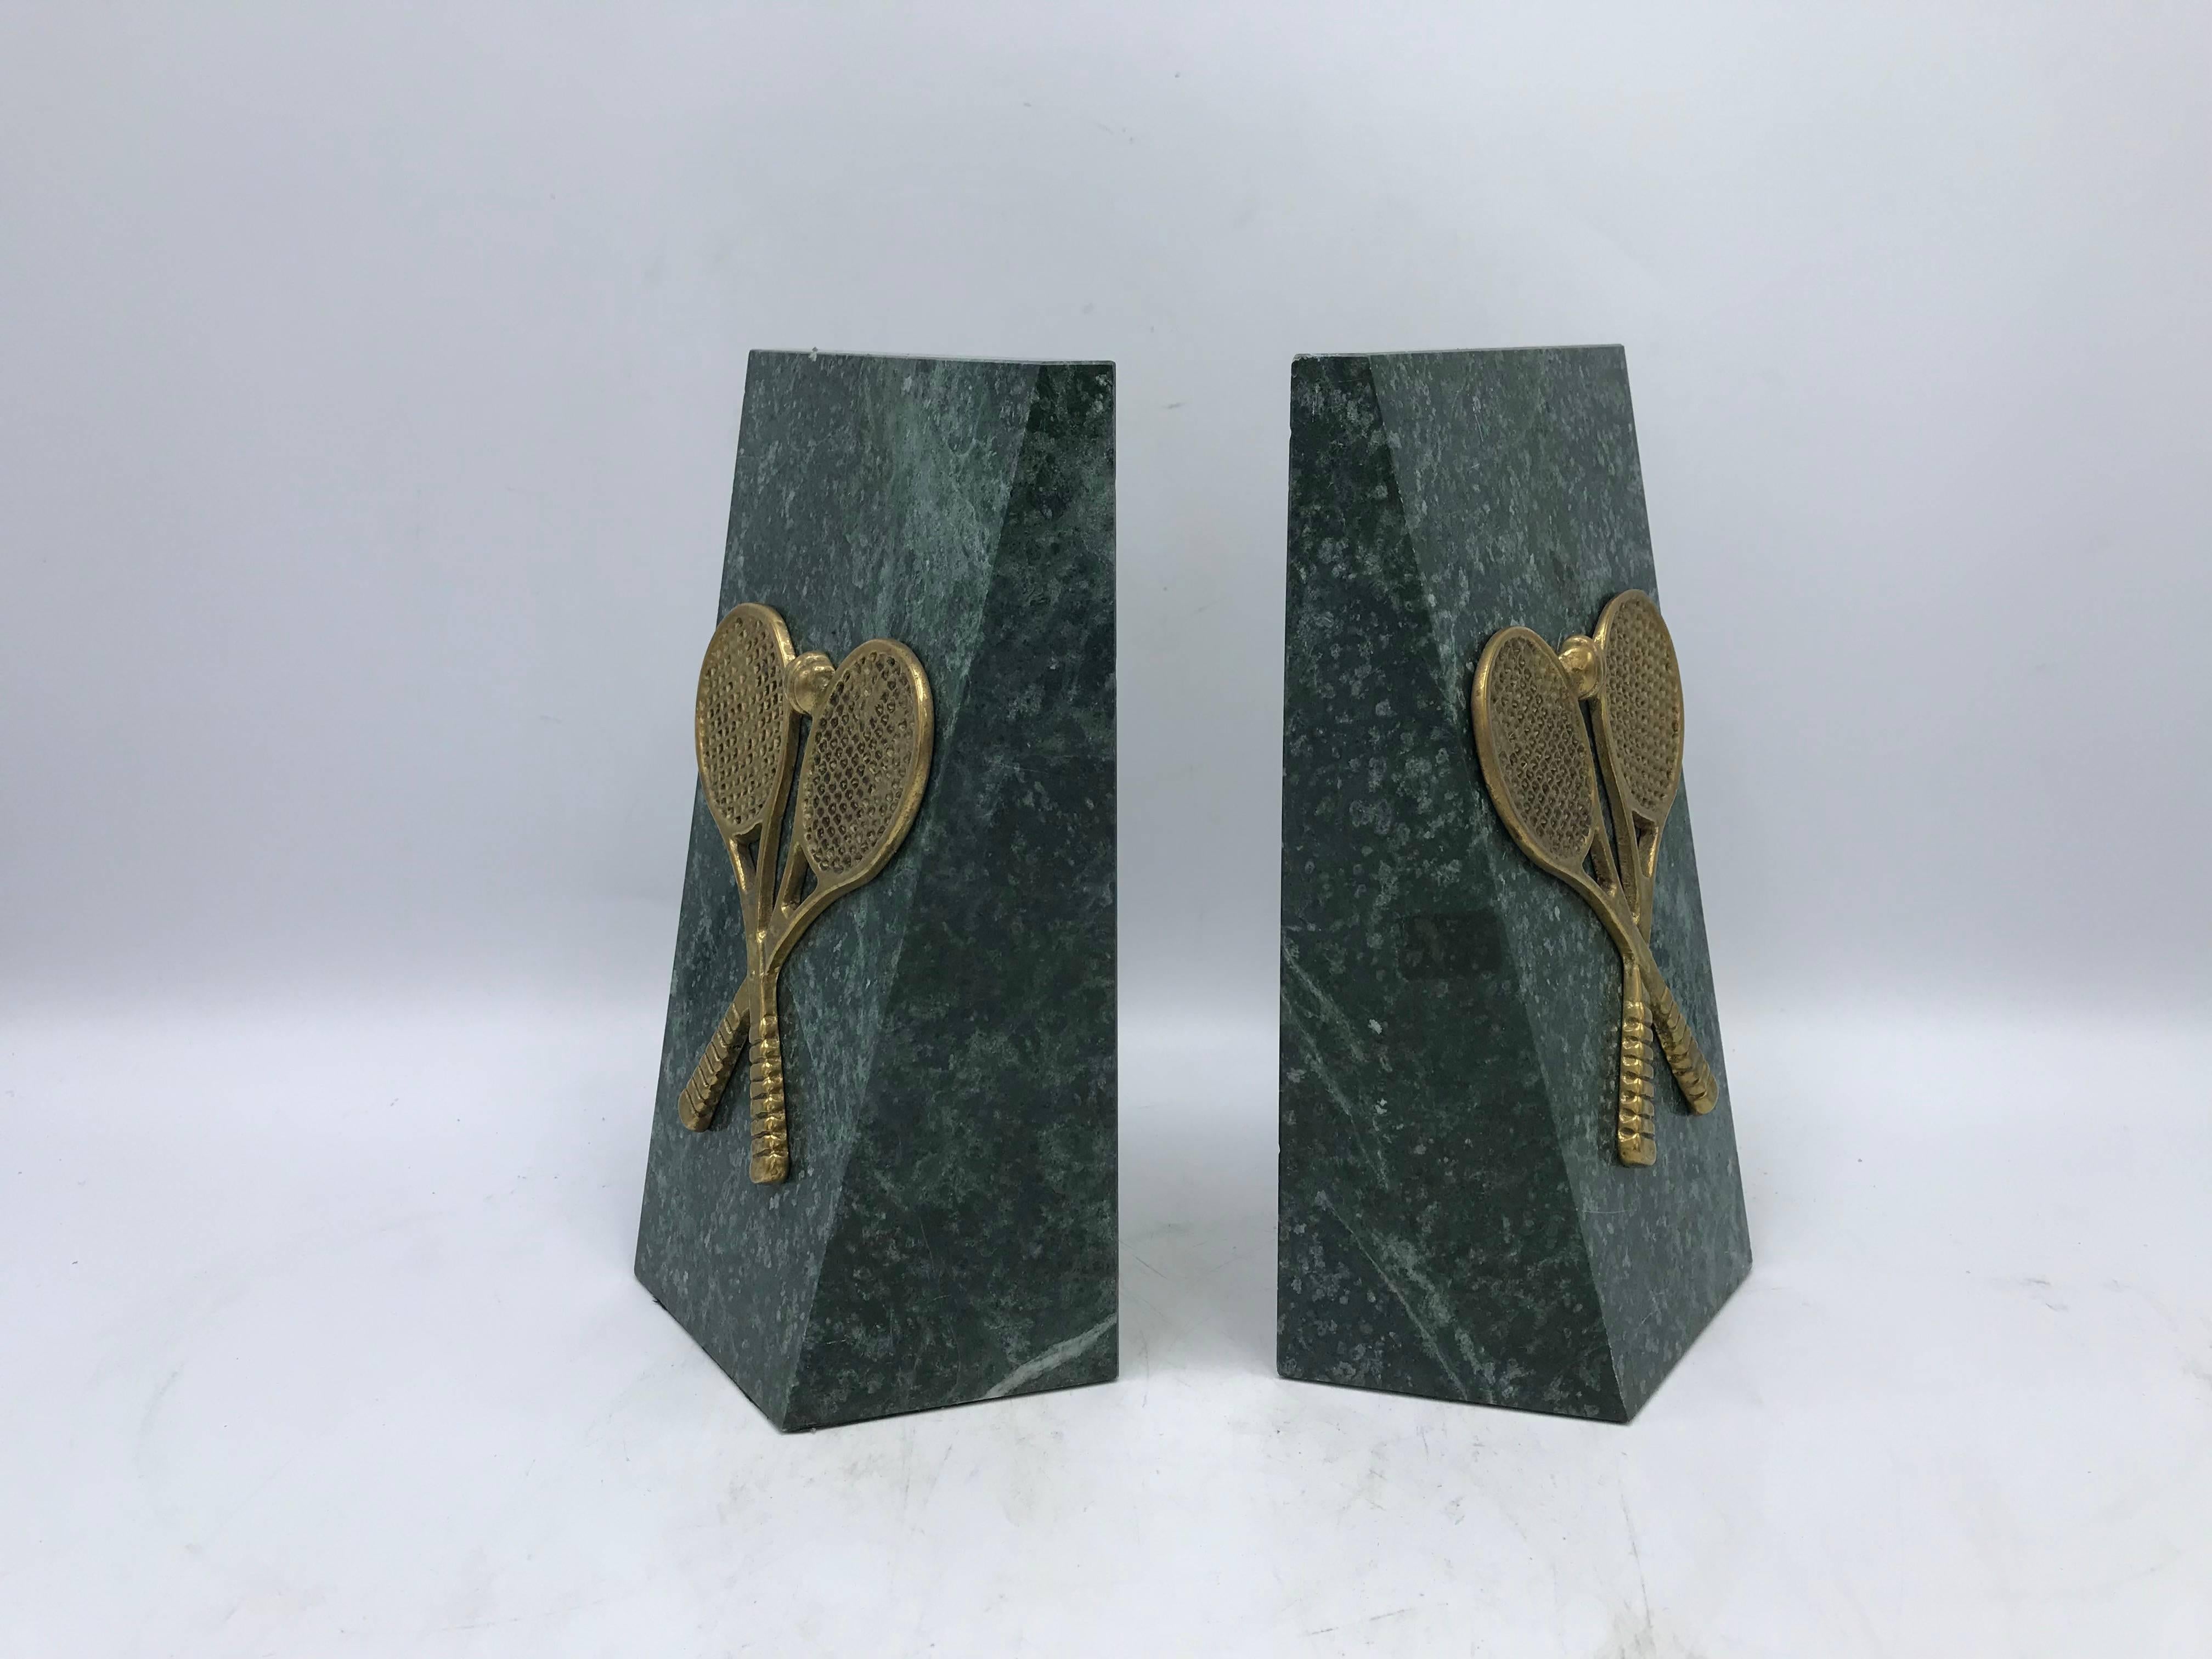 Listed is a stunning and substantial, pair of 1970s Italian marble bookends. The pair has brass tennis racket sculptures on each, perfect for any tennis enthusiast or sports den! Heavy, weighing 5.5lbs/each (11lbs/pair).